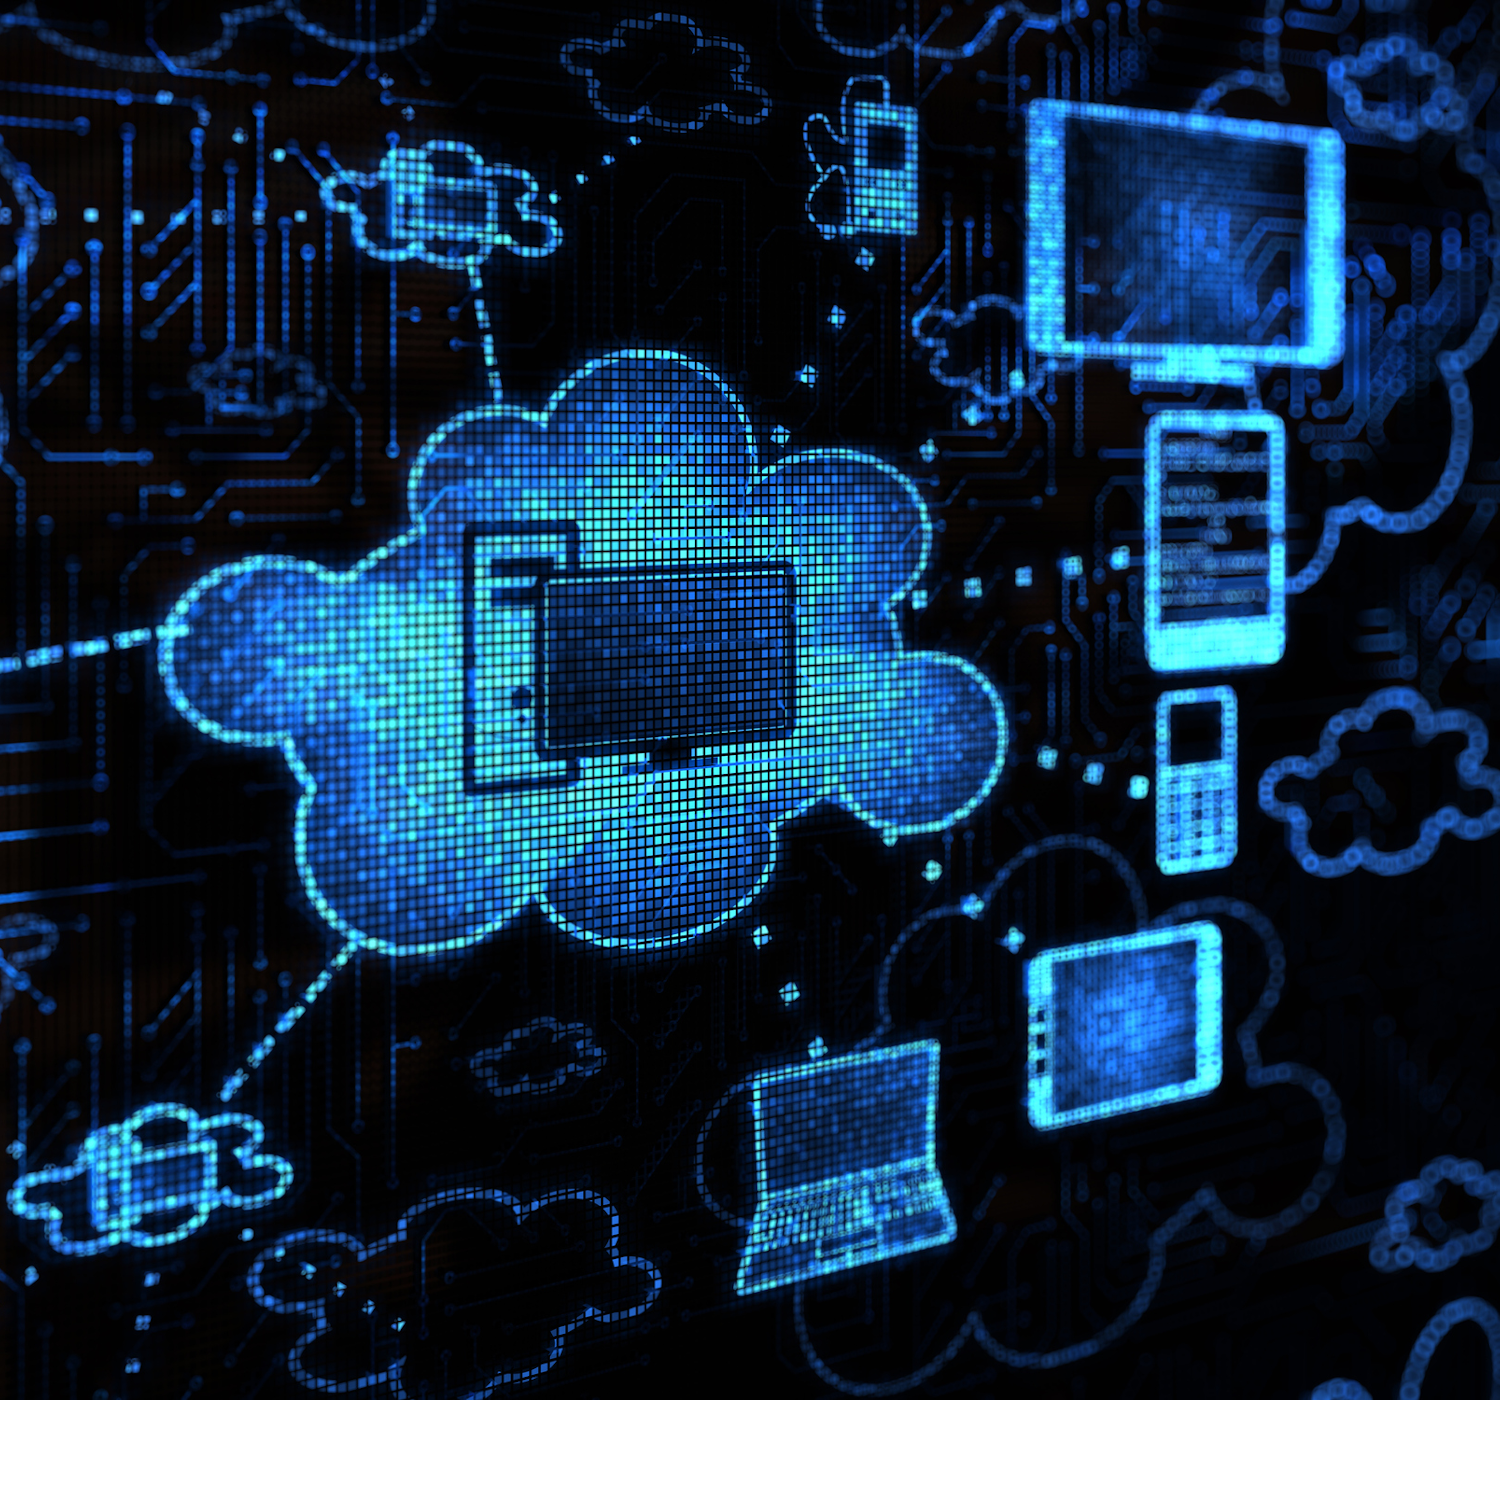 Abstract illustration of cloud-connected devices.